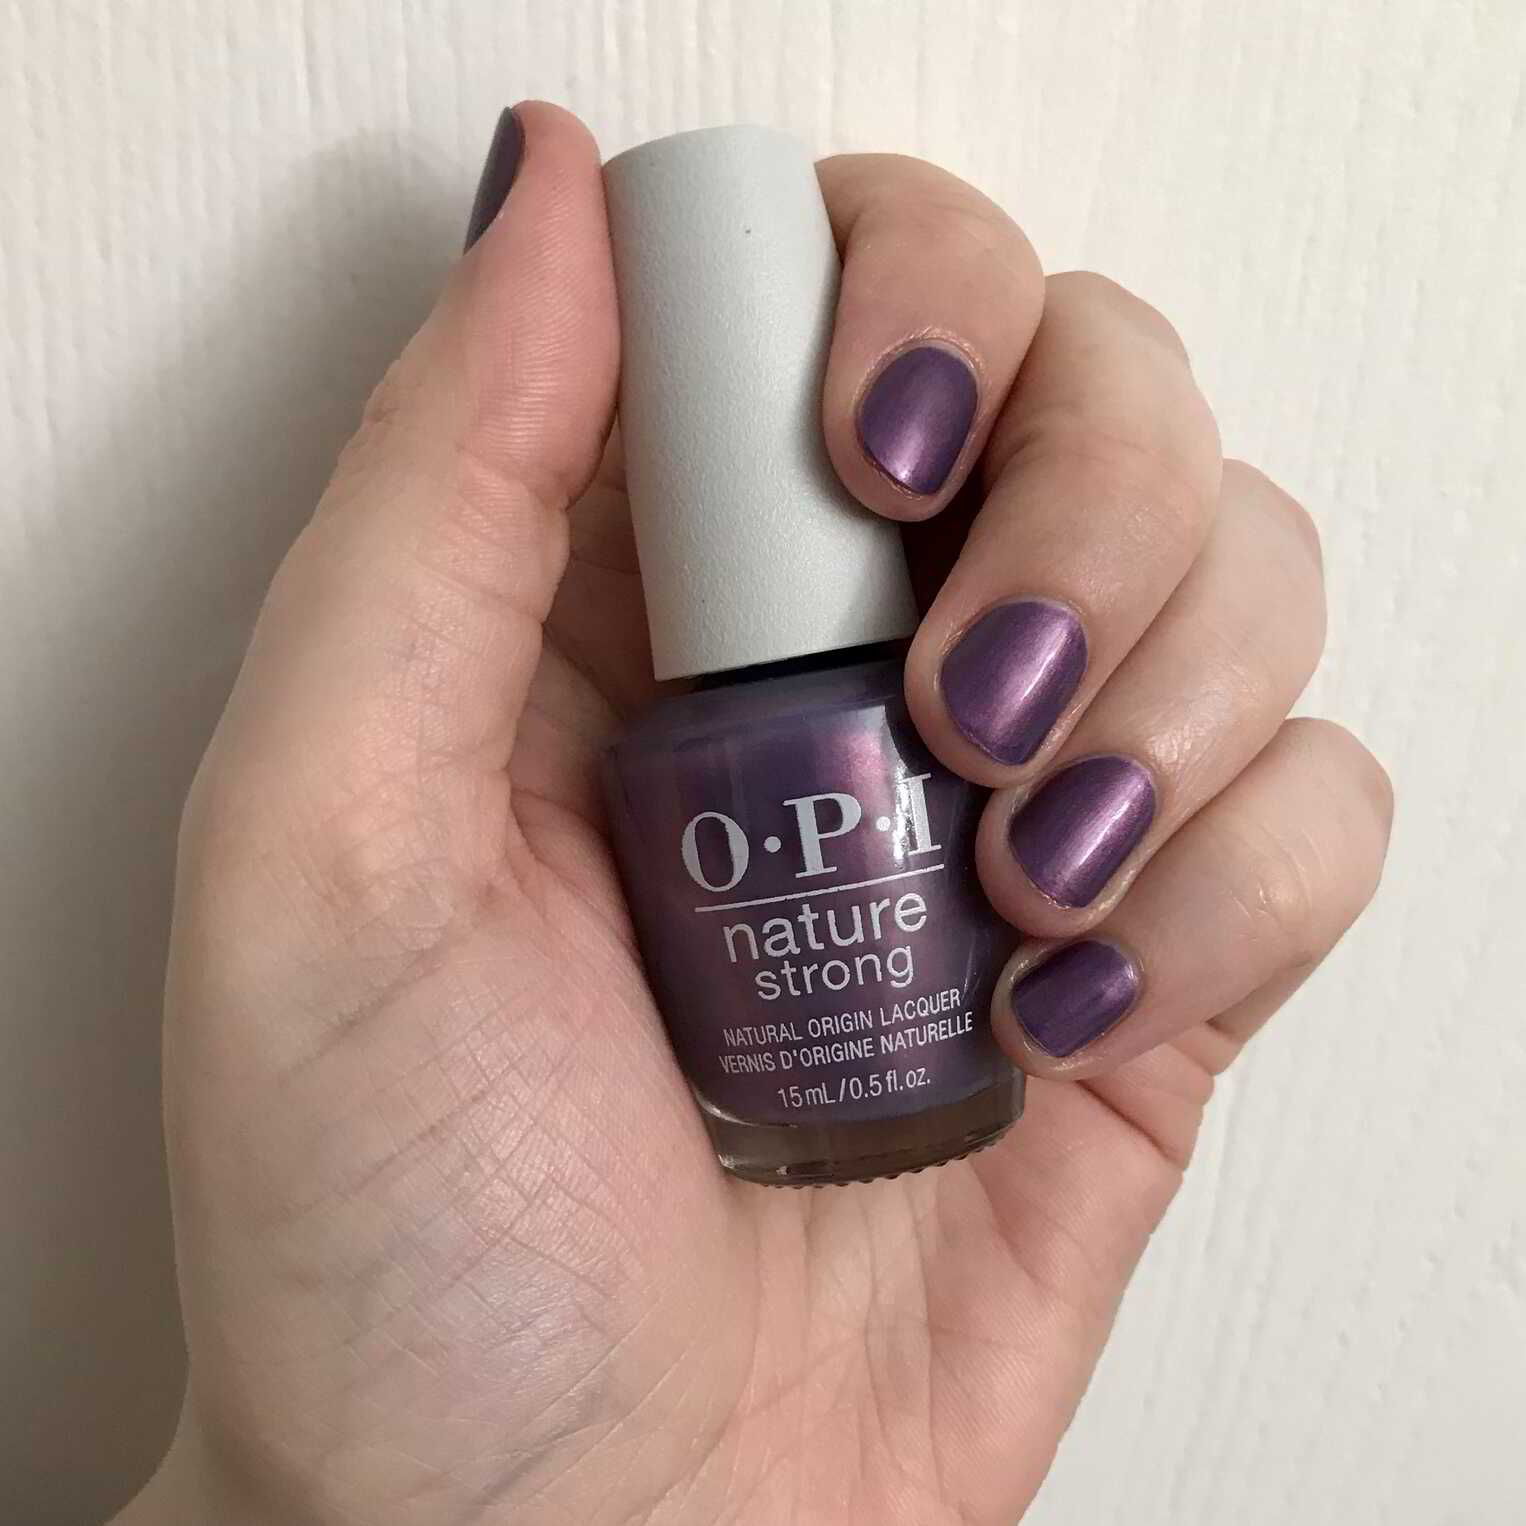 Nail polish manicure of shade OPI NATURE STRONG Achieve Grapeness, 